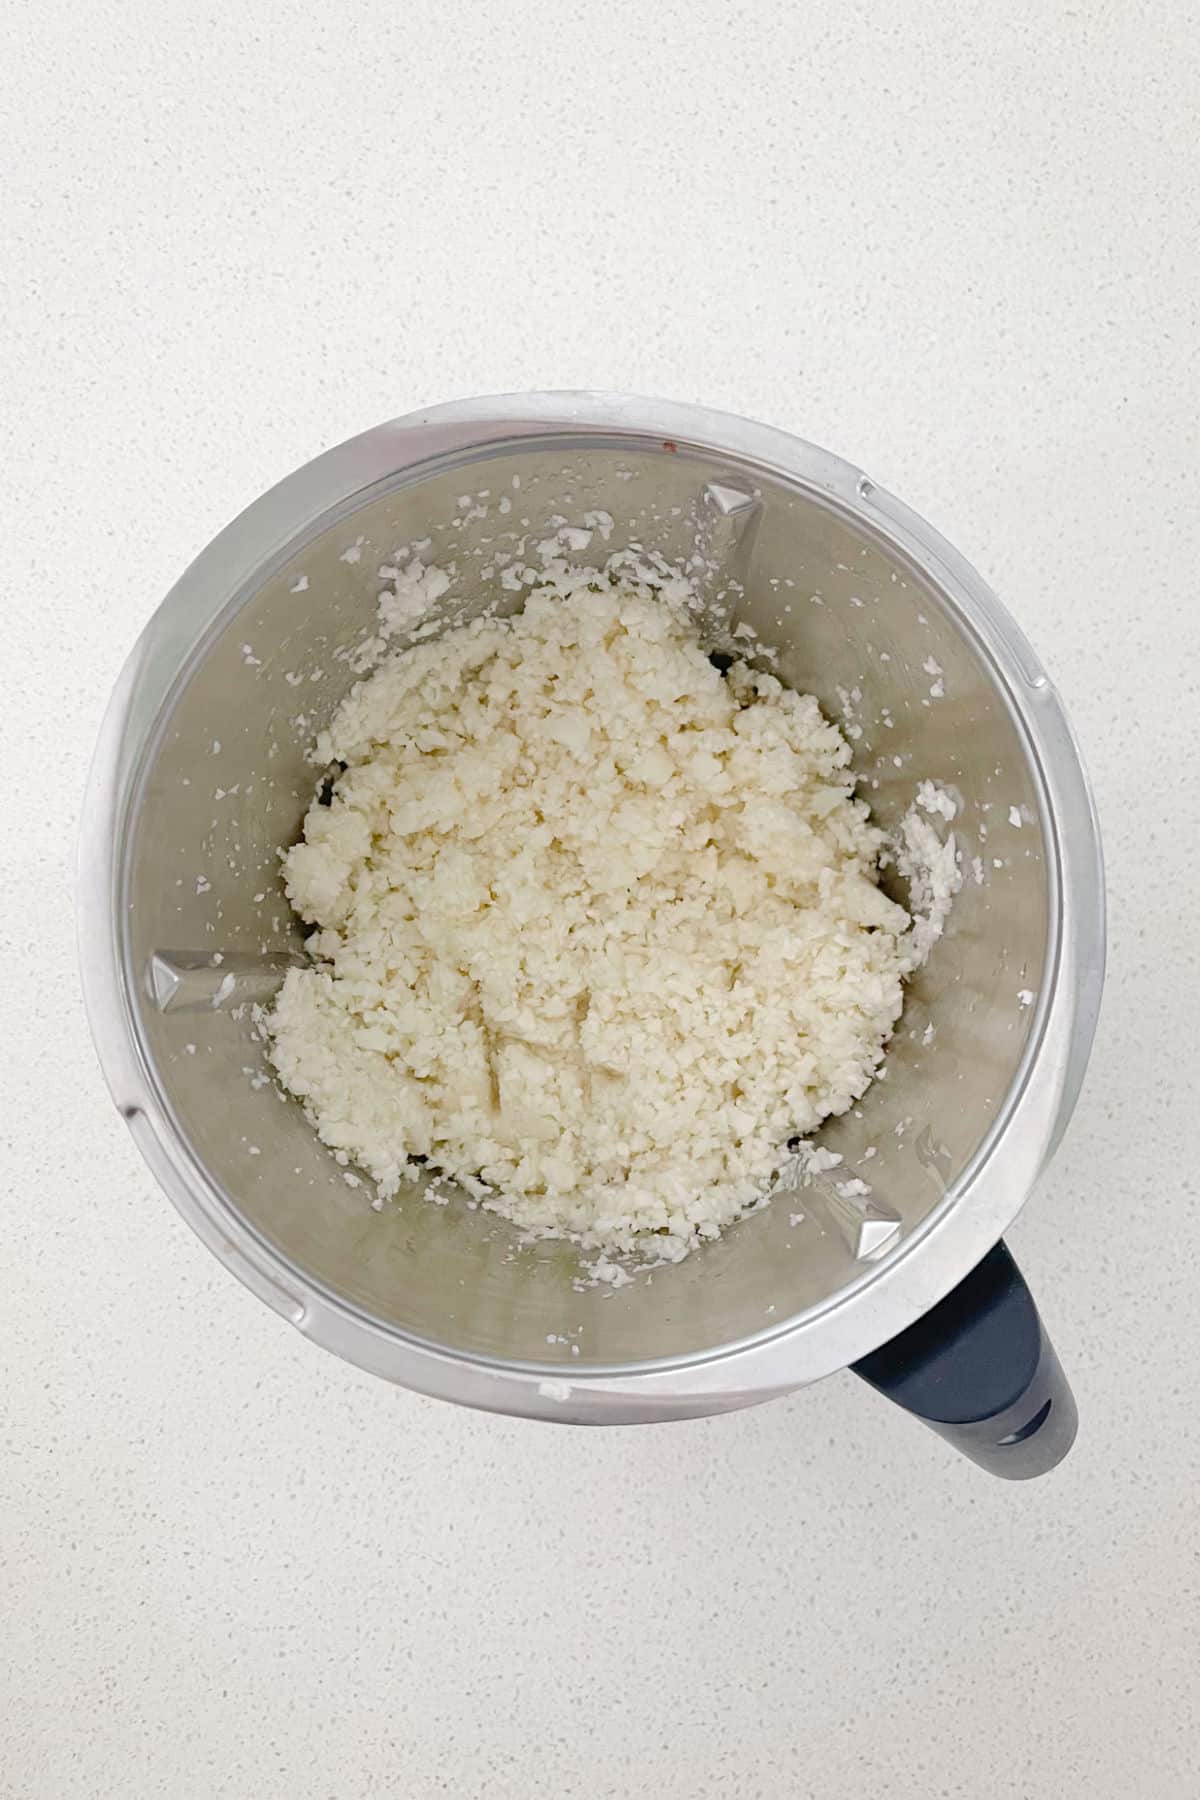 Grated Cauliflower in a Thermomix Bowl.